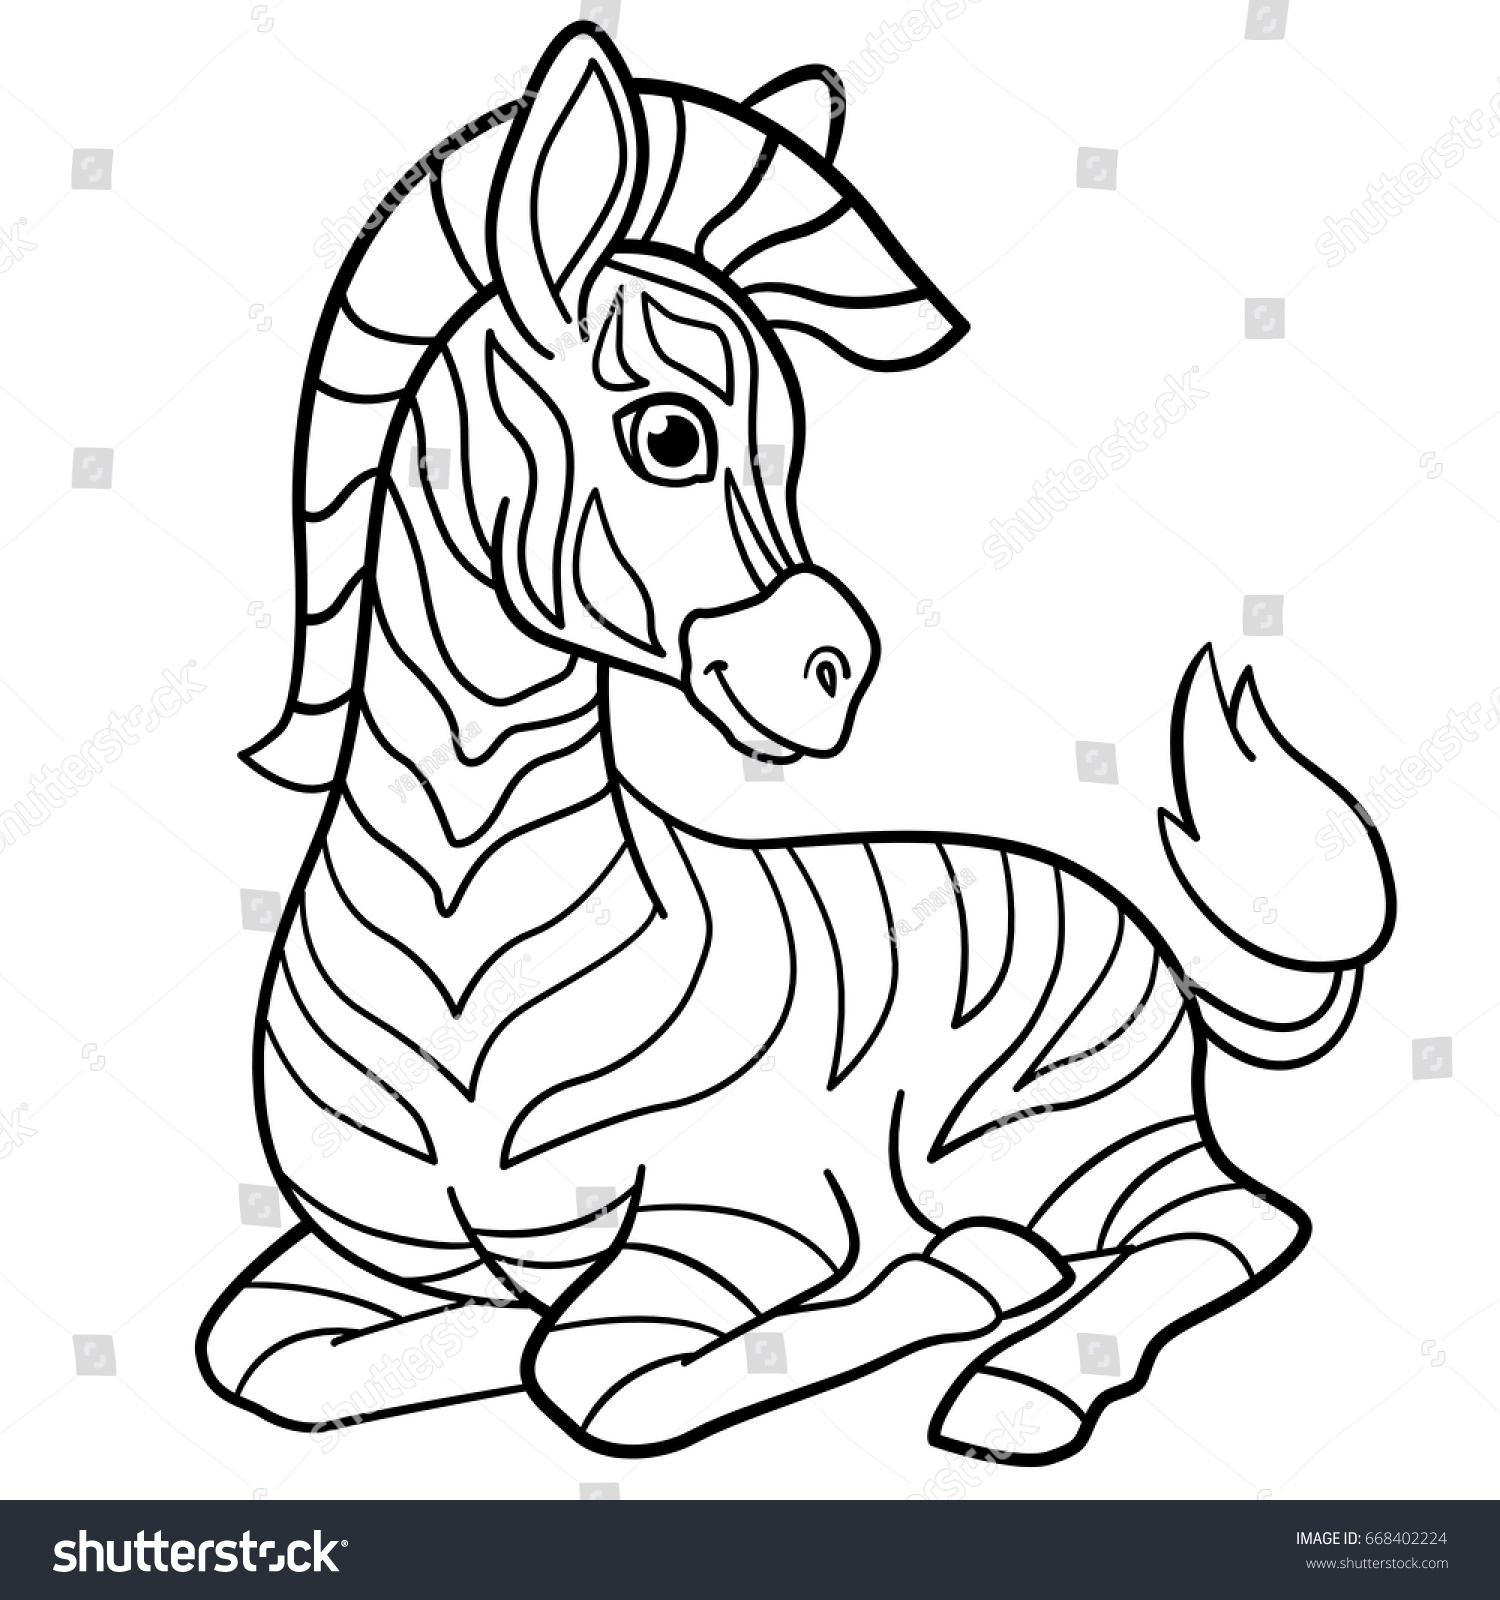 Coloring pages Little cute baby zebra smiles